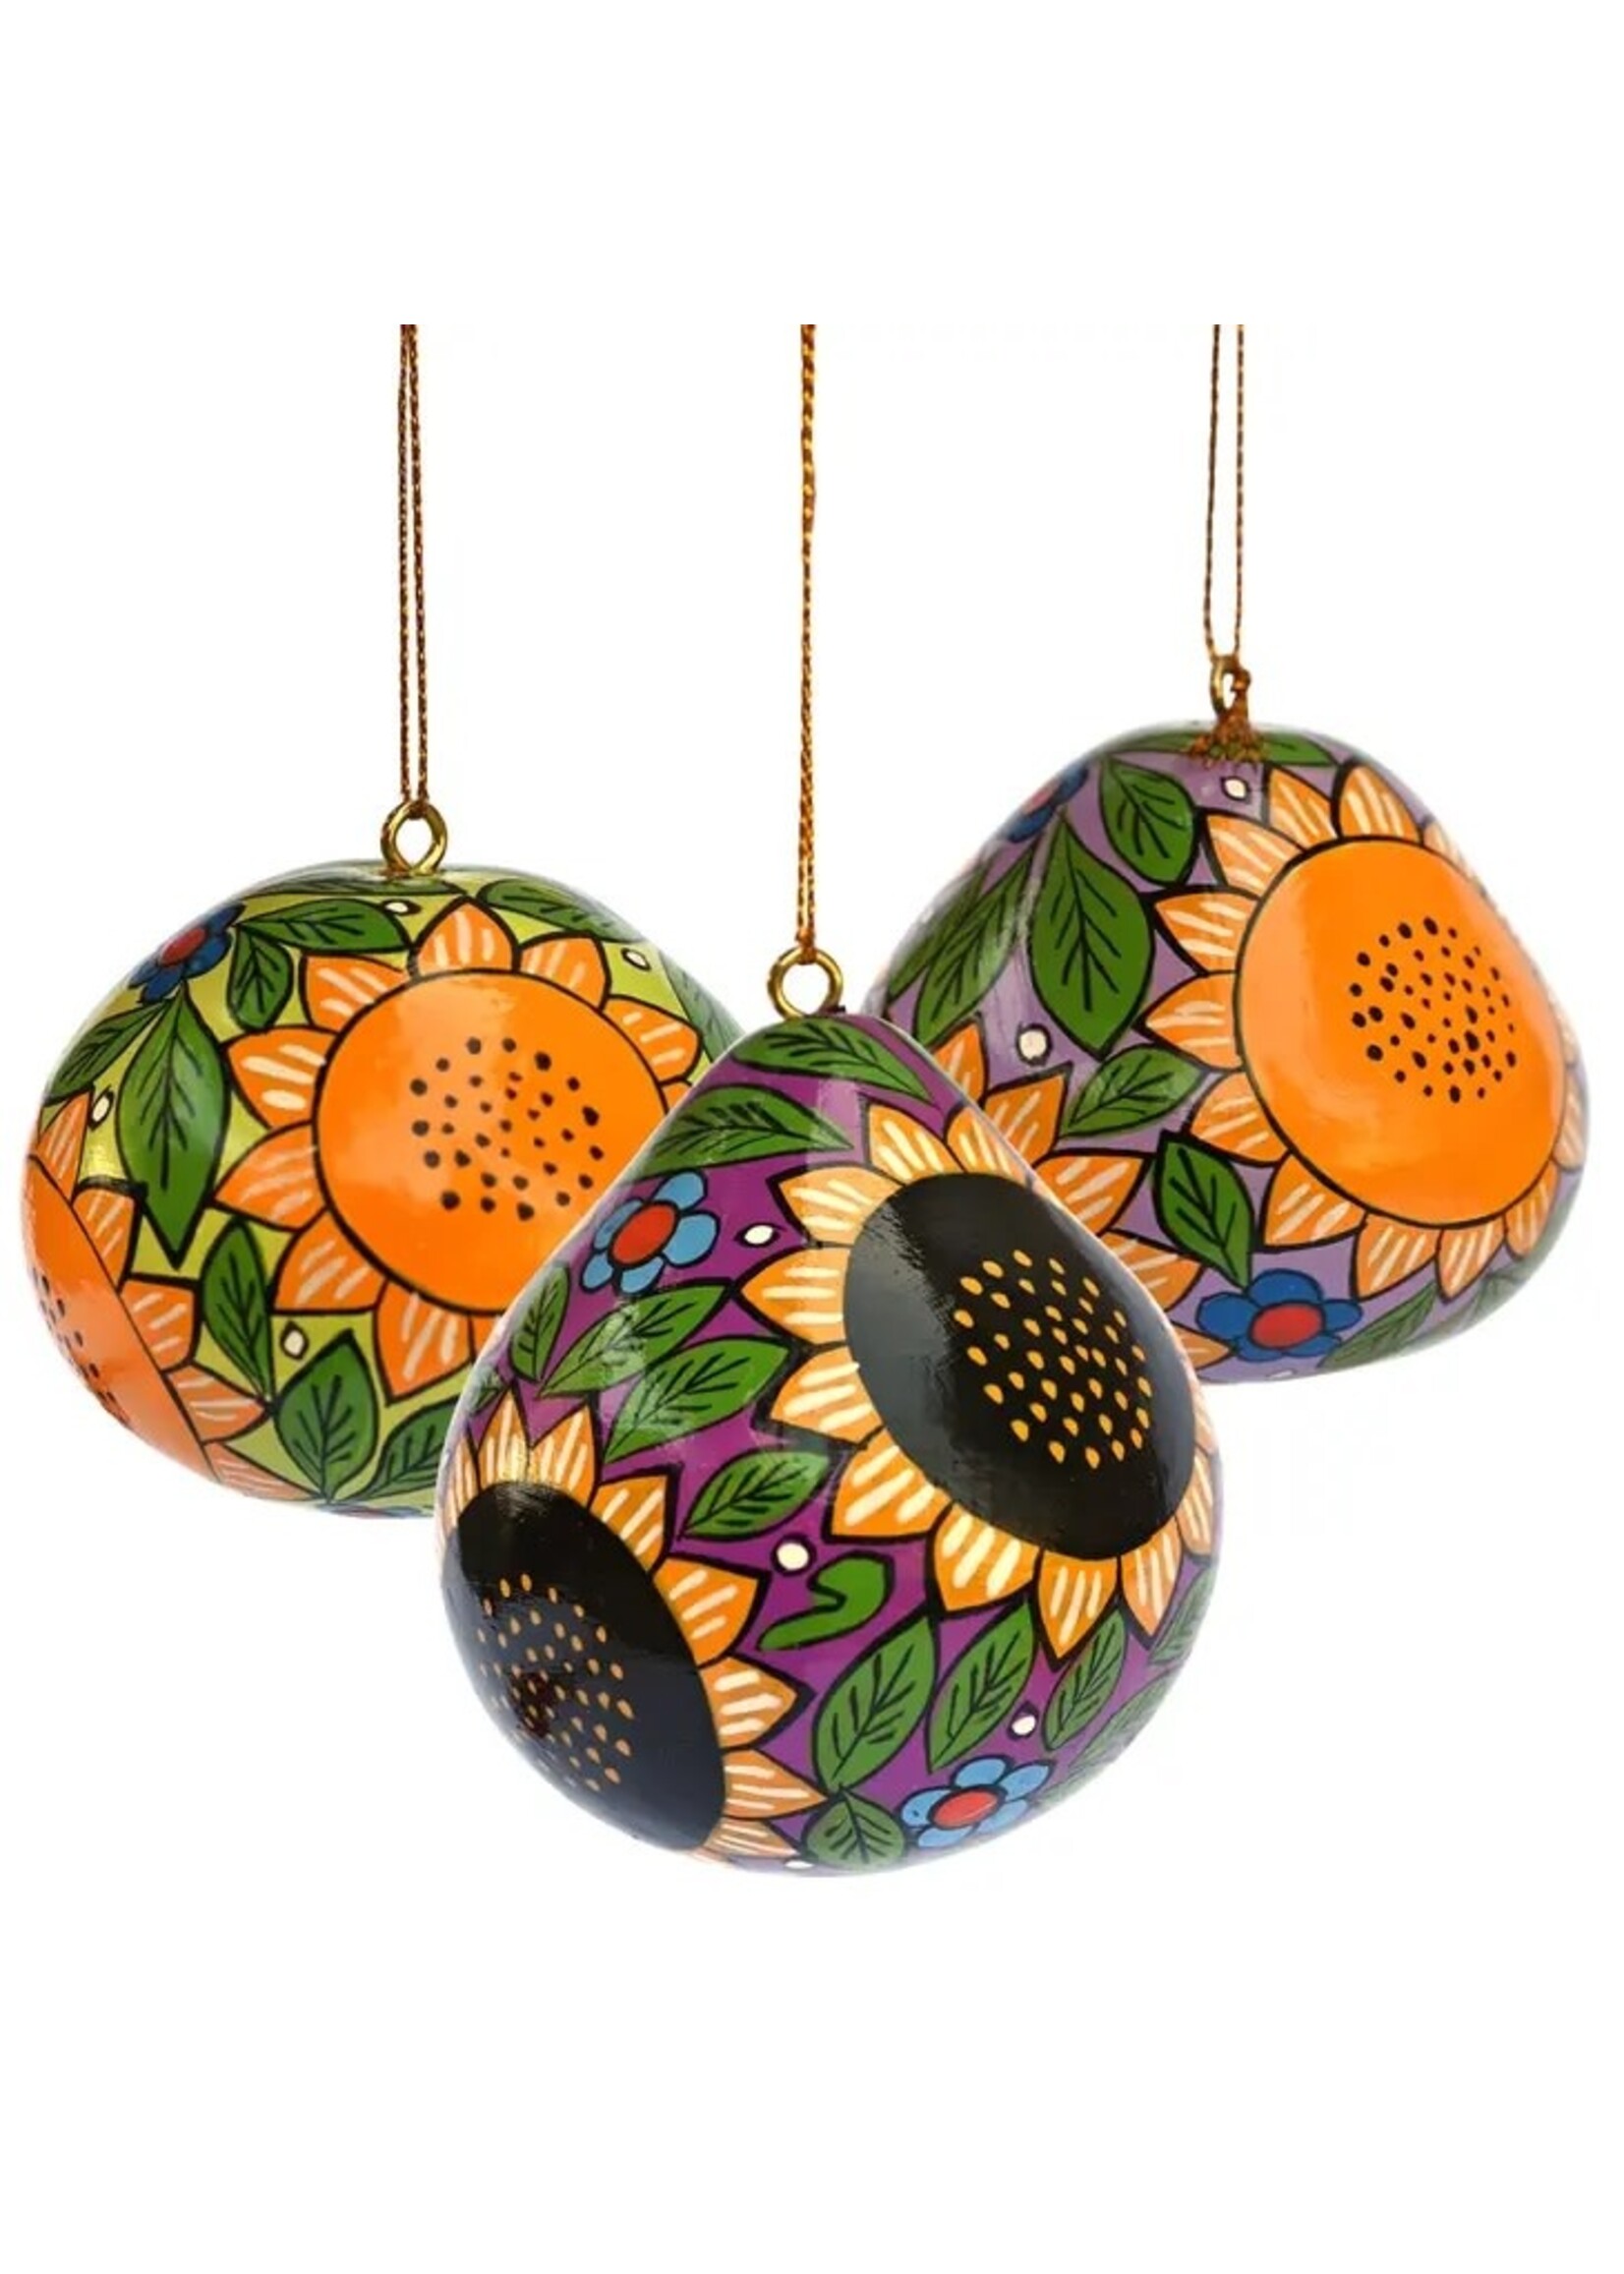 Ornament - Painted Gourd Sunflowers